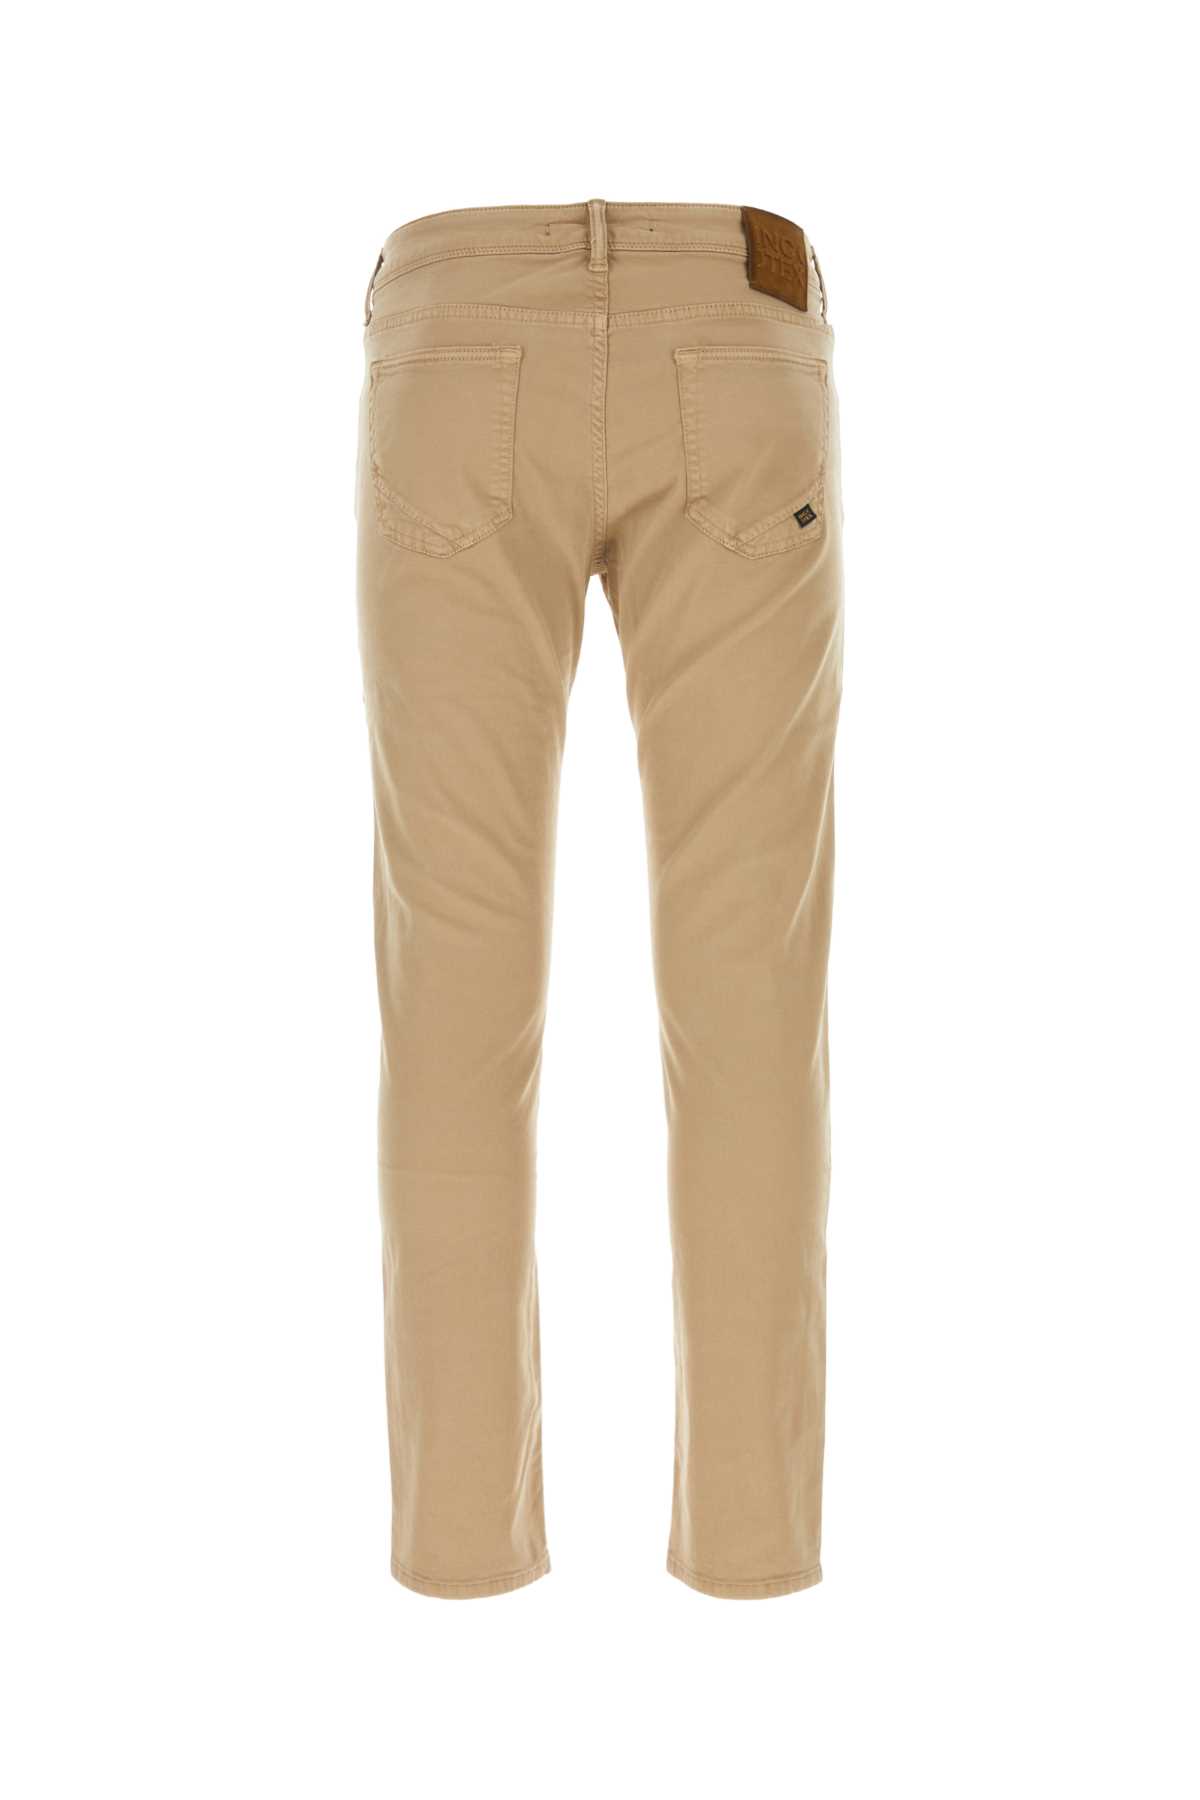 Incotex Beige Stretch Cotton Pant In Coloniale